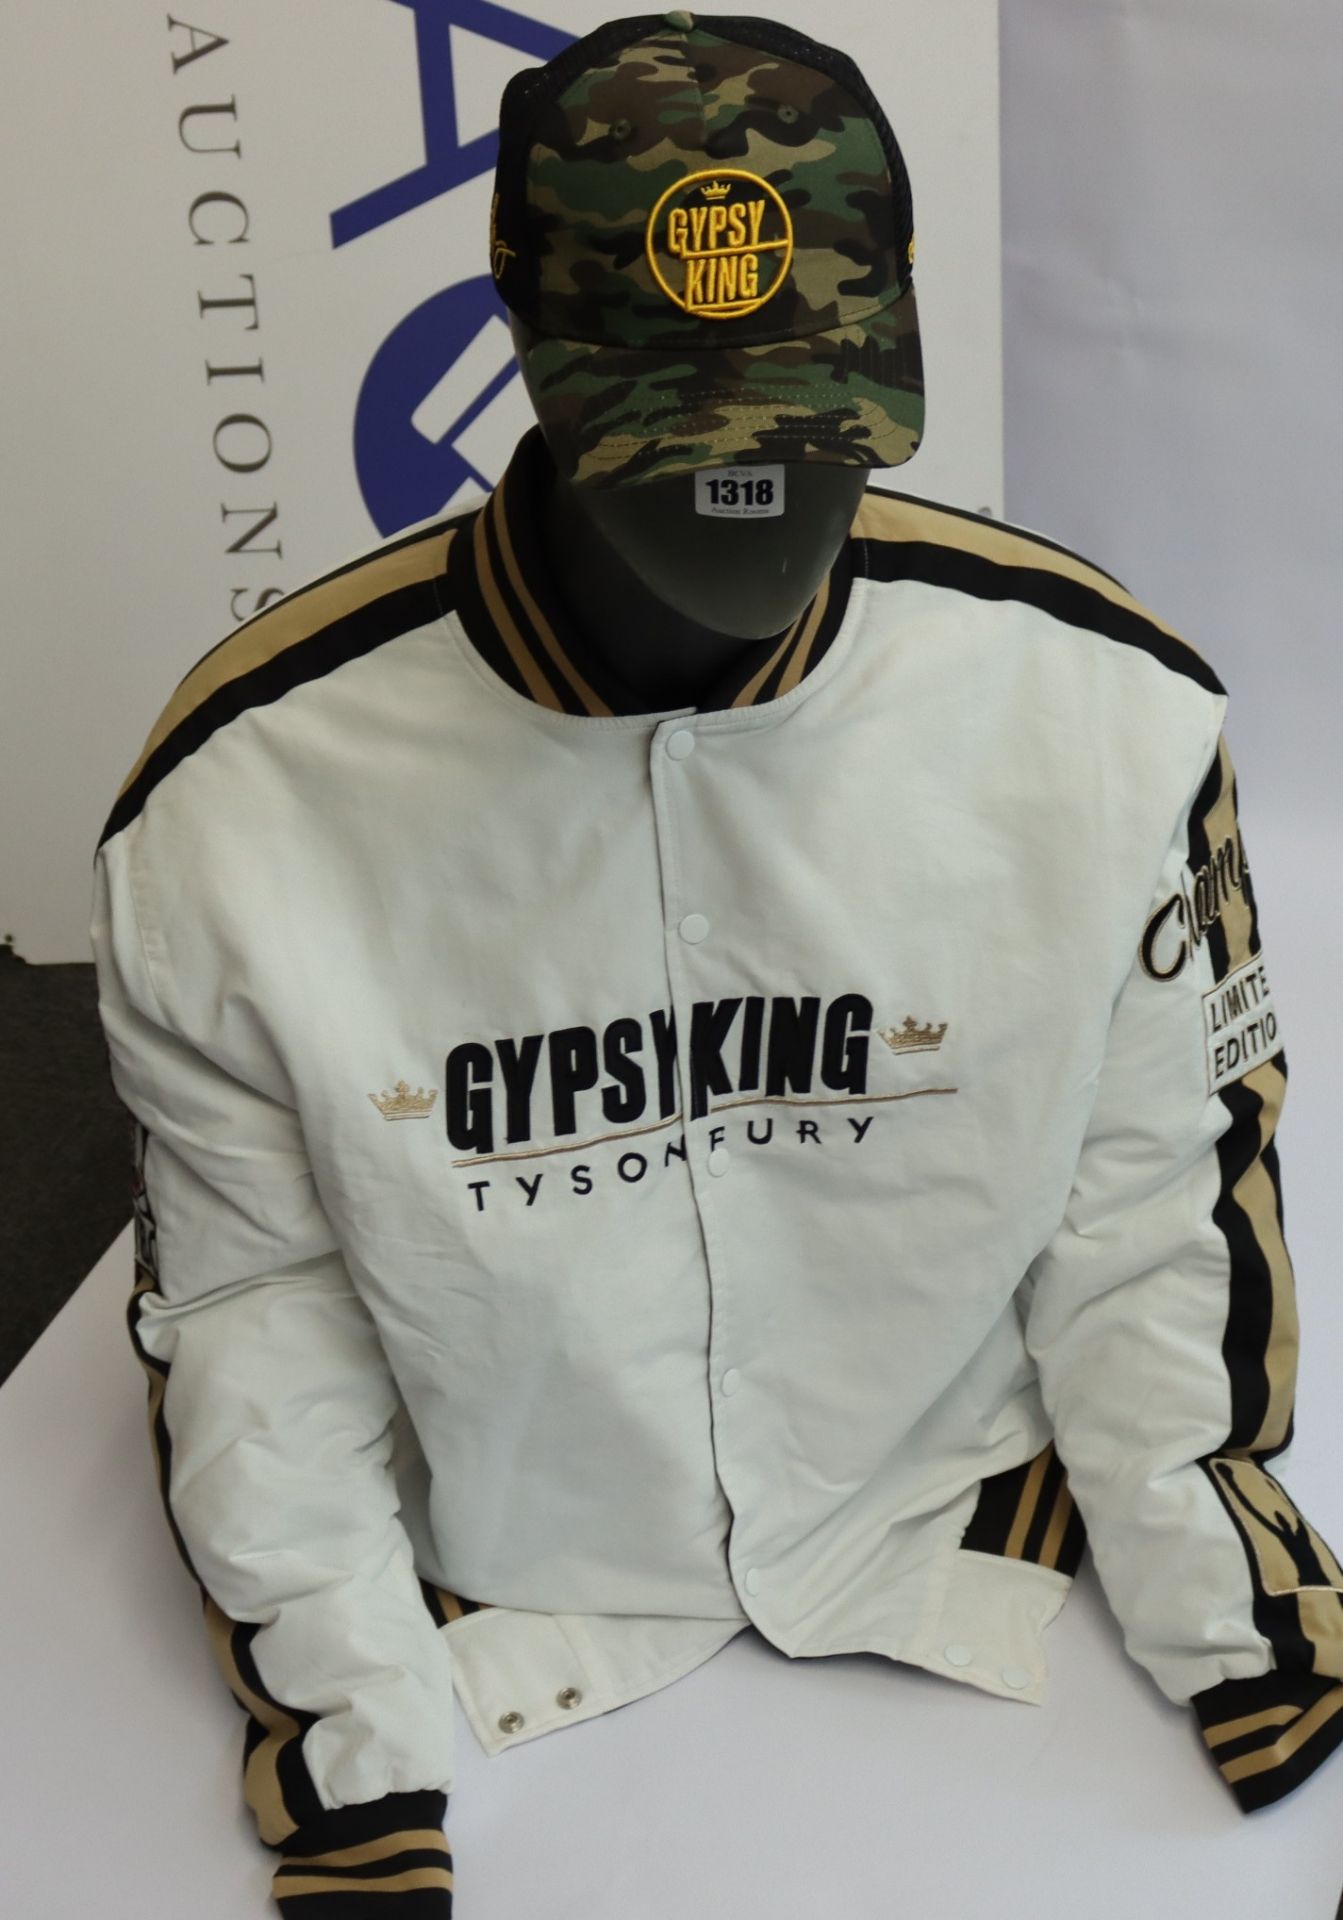 An as new Goldstar Gypsy King by Tyson Fury limited edition white bomber jacket (XXL) and baseball